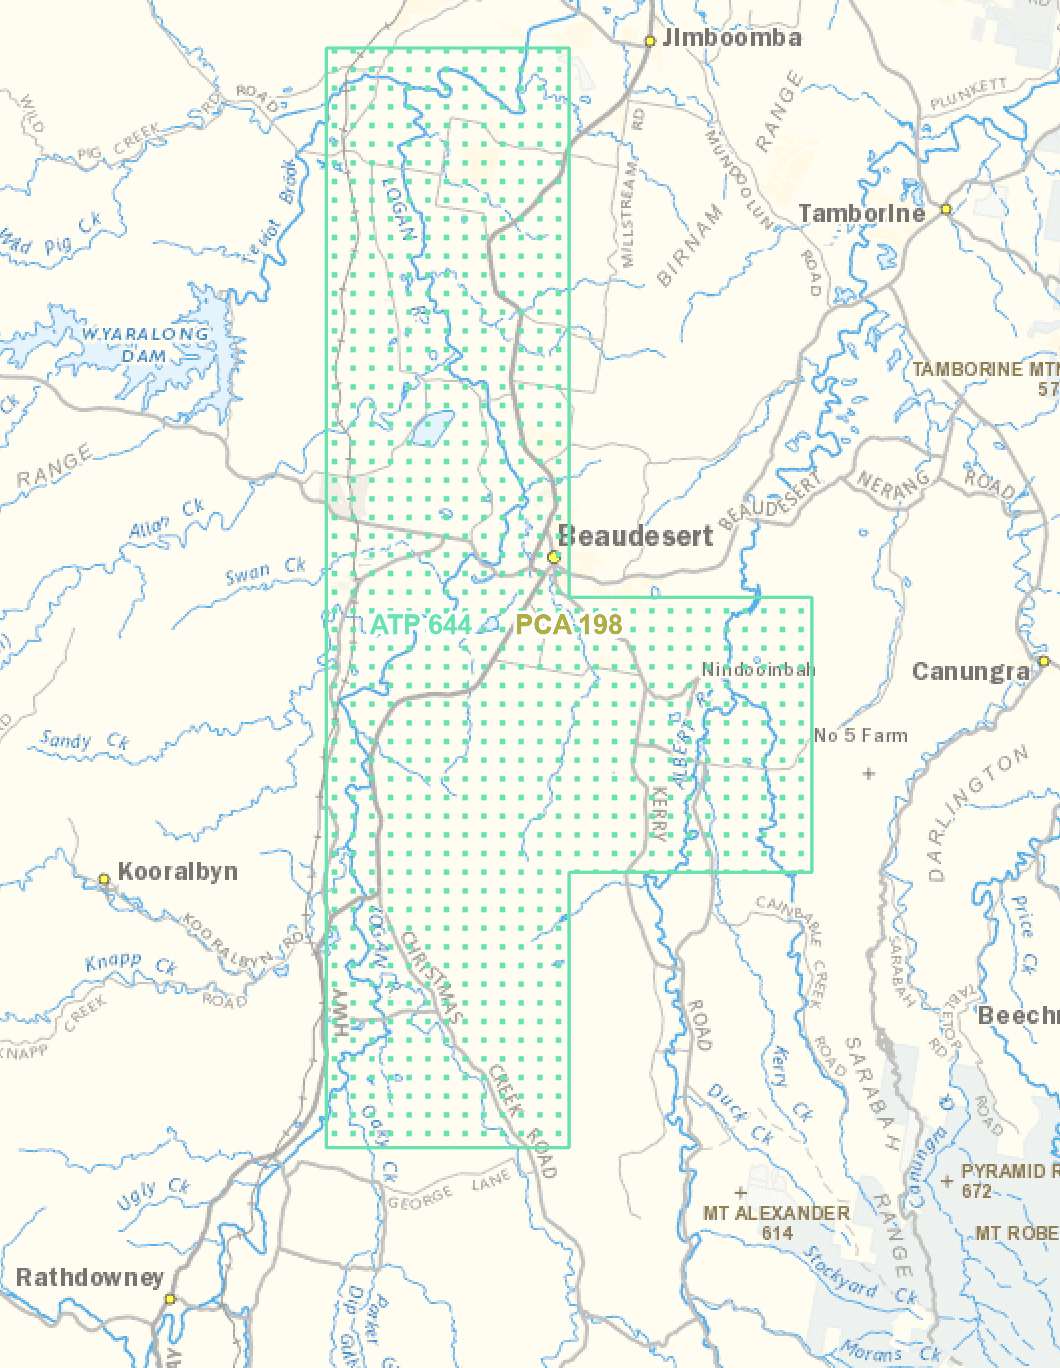 The State Government Is Curently Considering CSG Mining Company Arrow Energys Potential Commercial Area PCA Application Over Beaudesert And Surrounds. Map Source Geo Res Globe 